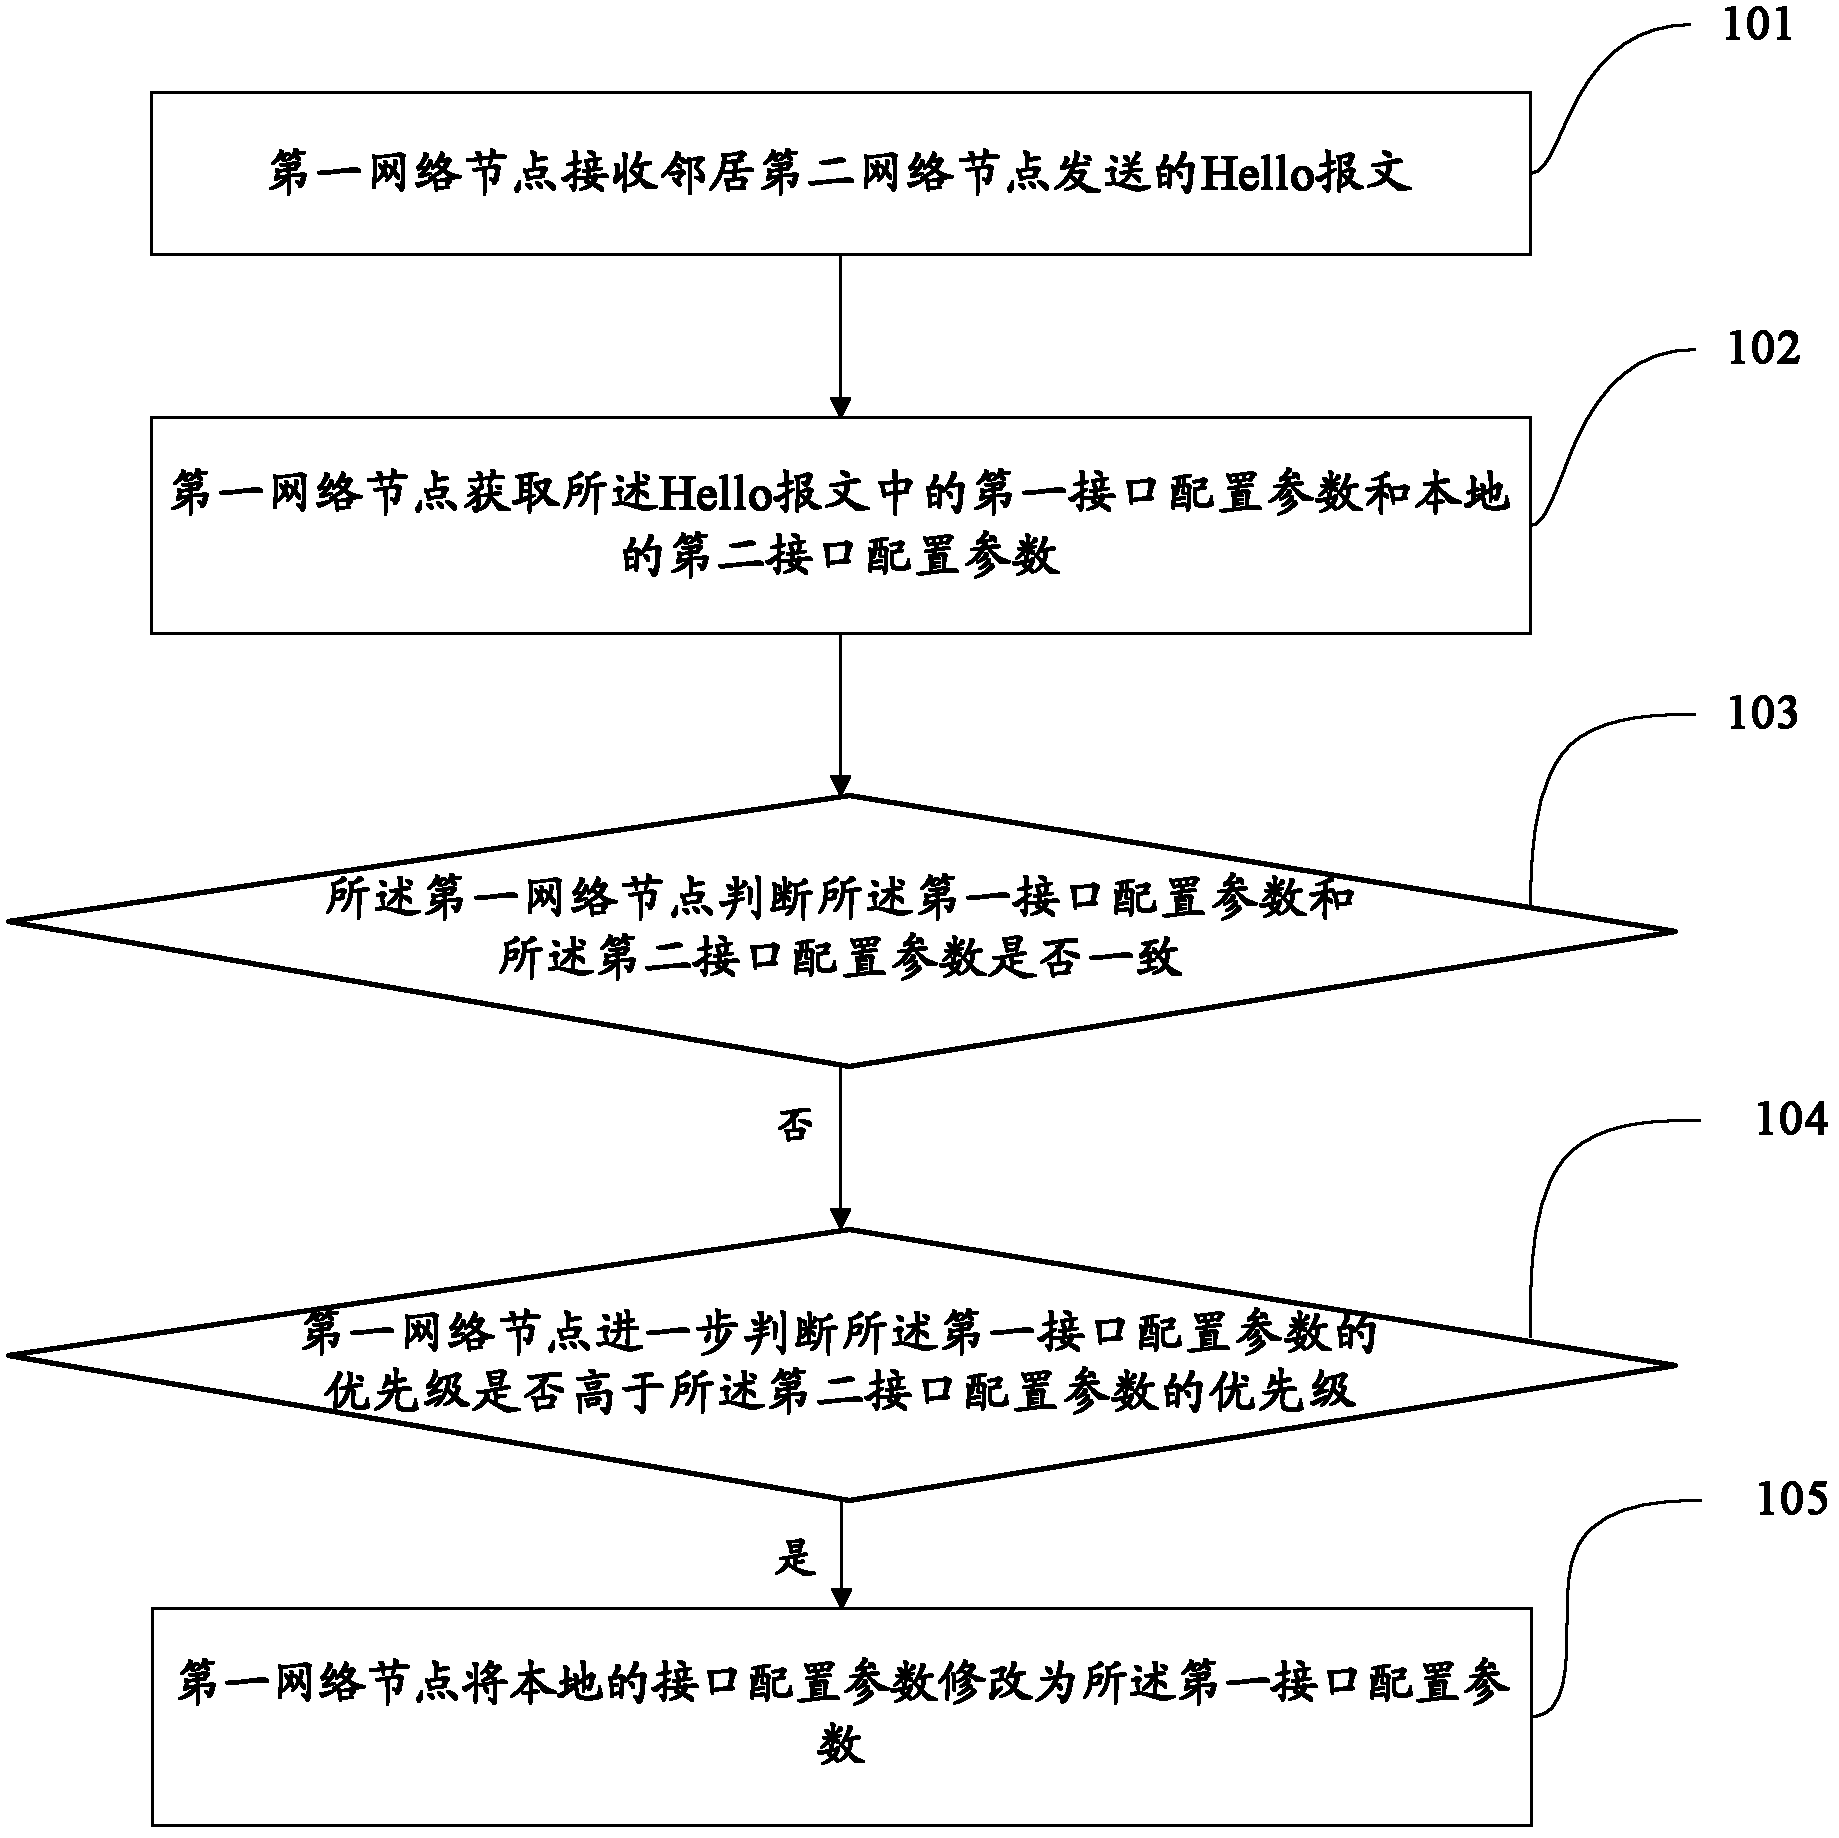 Message transmission method and network equipment